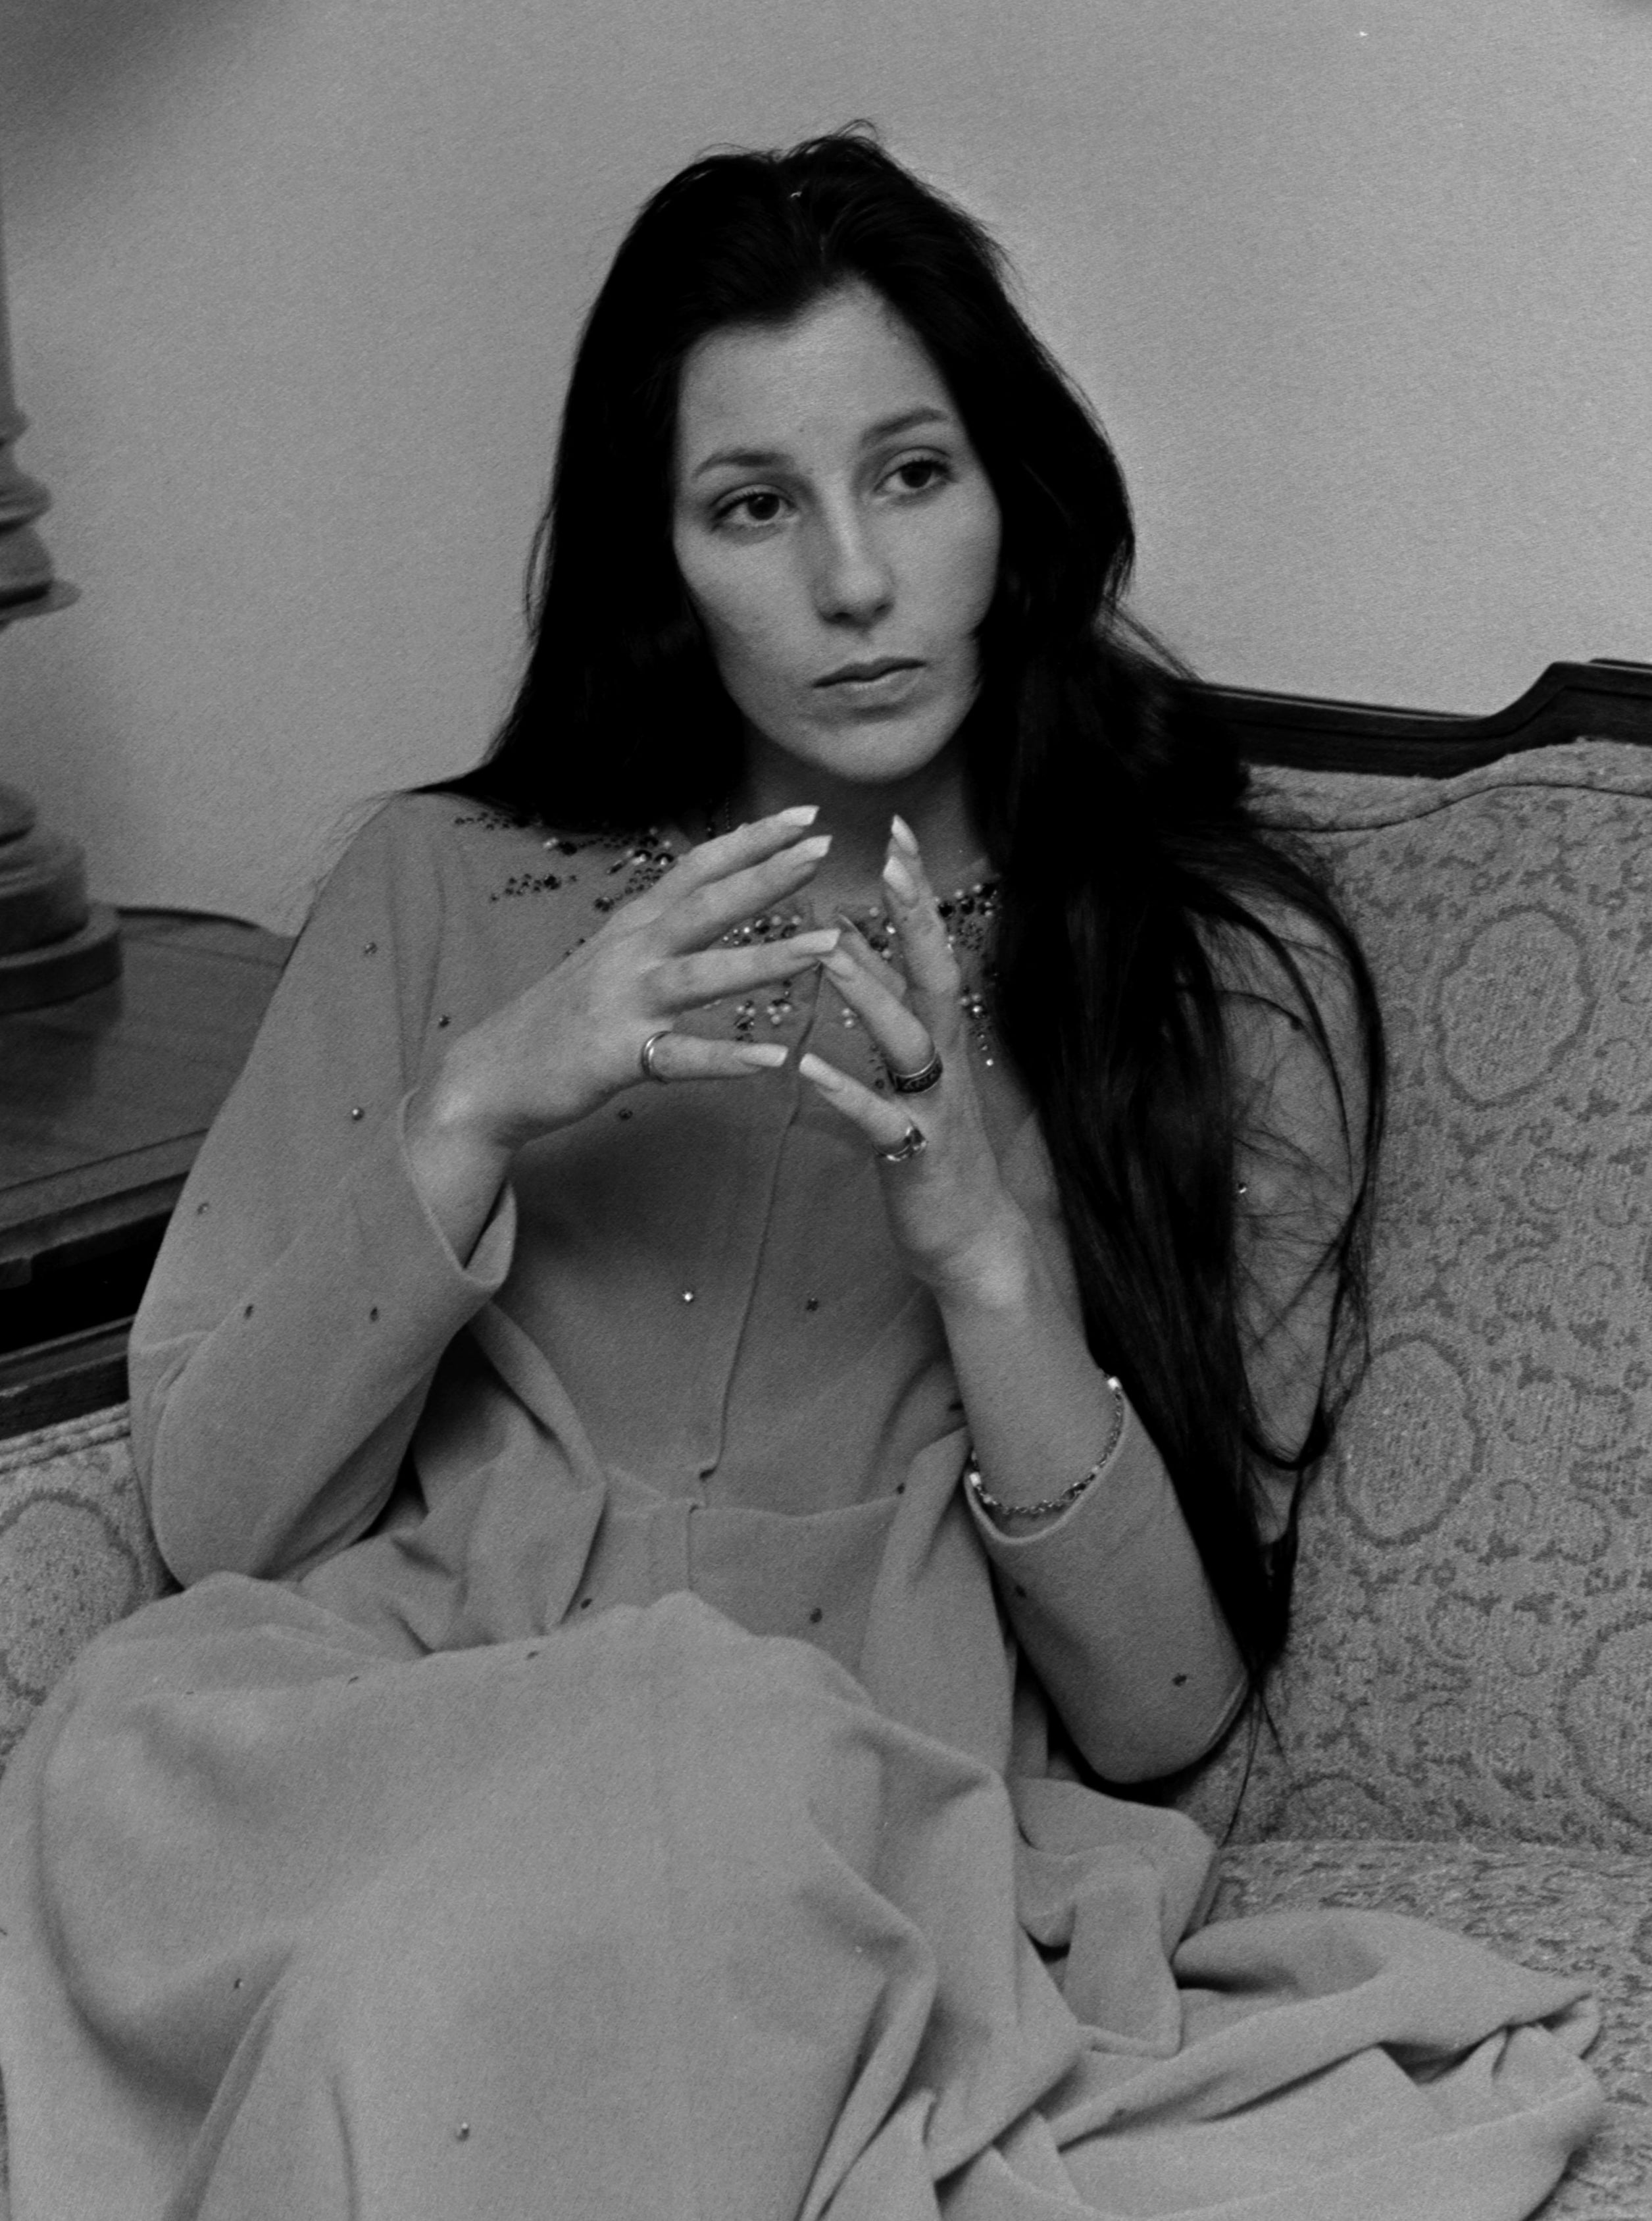 Young Cher